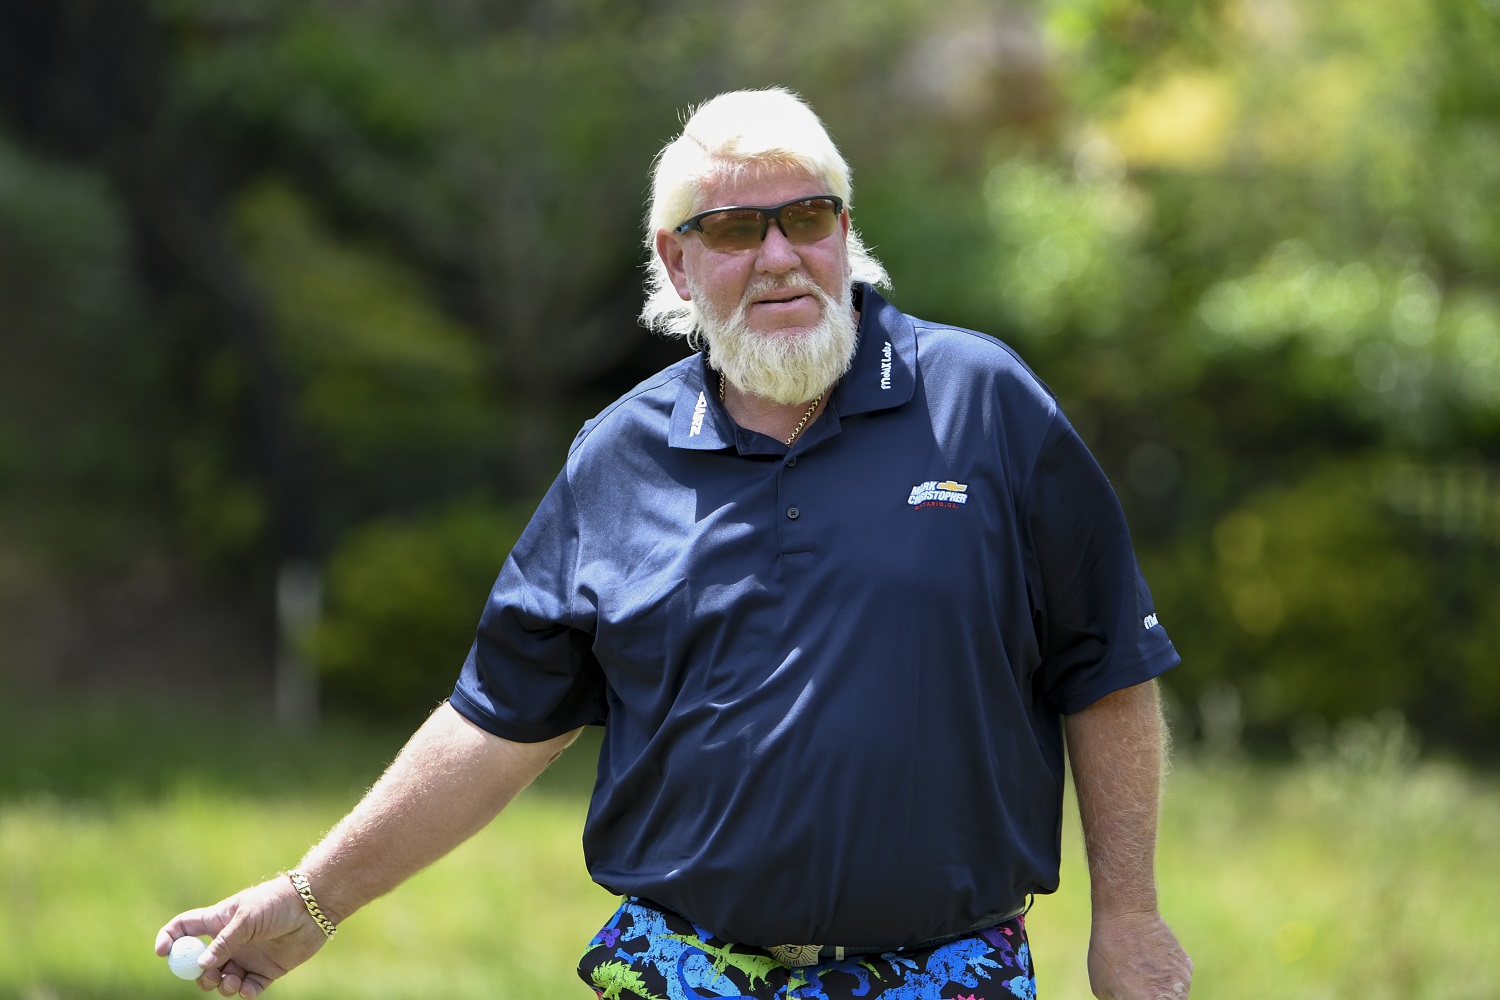 John Daly finishes a round Mitsubishi Electric Classic at TPC Sugarloaf on May 14, 2021 in Duluth, Georgia.